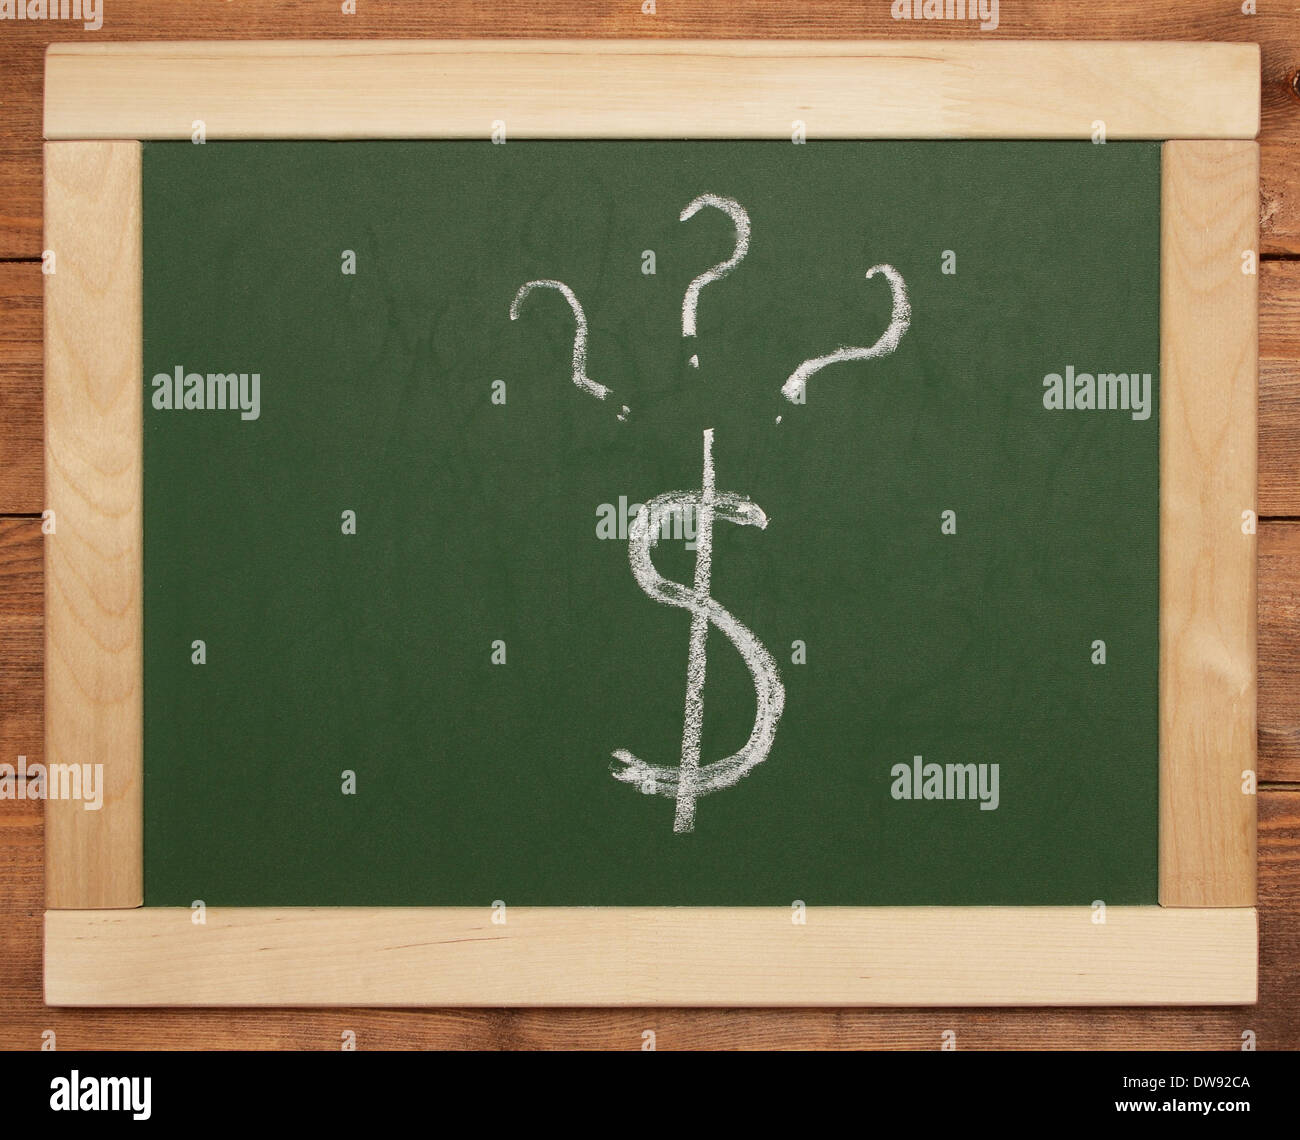 dollar sign and questions on blackboard Stock Photo